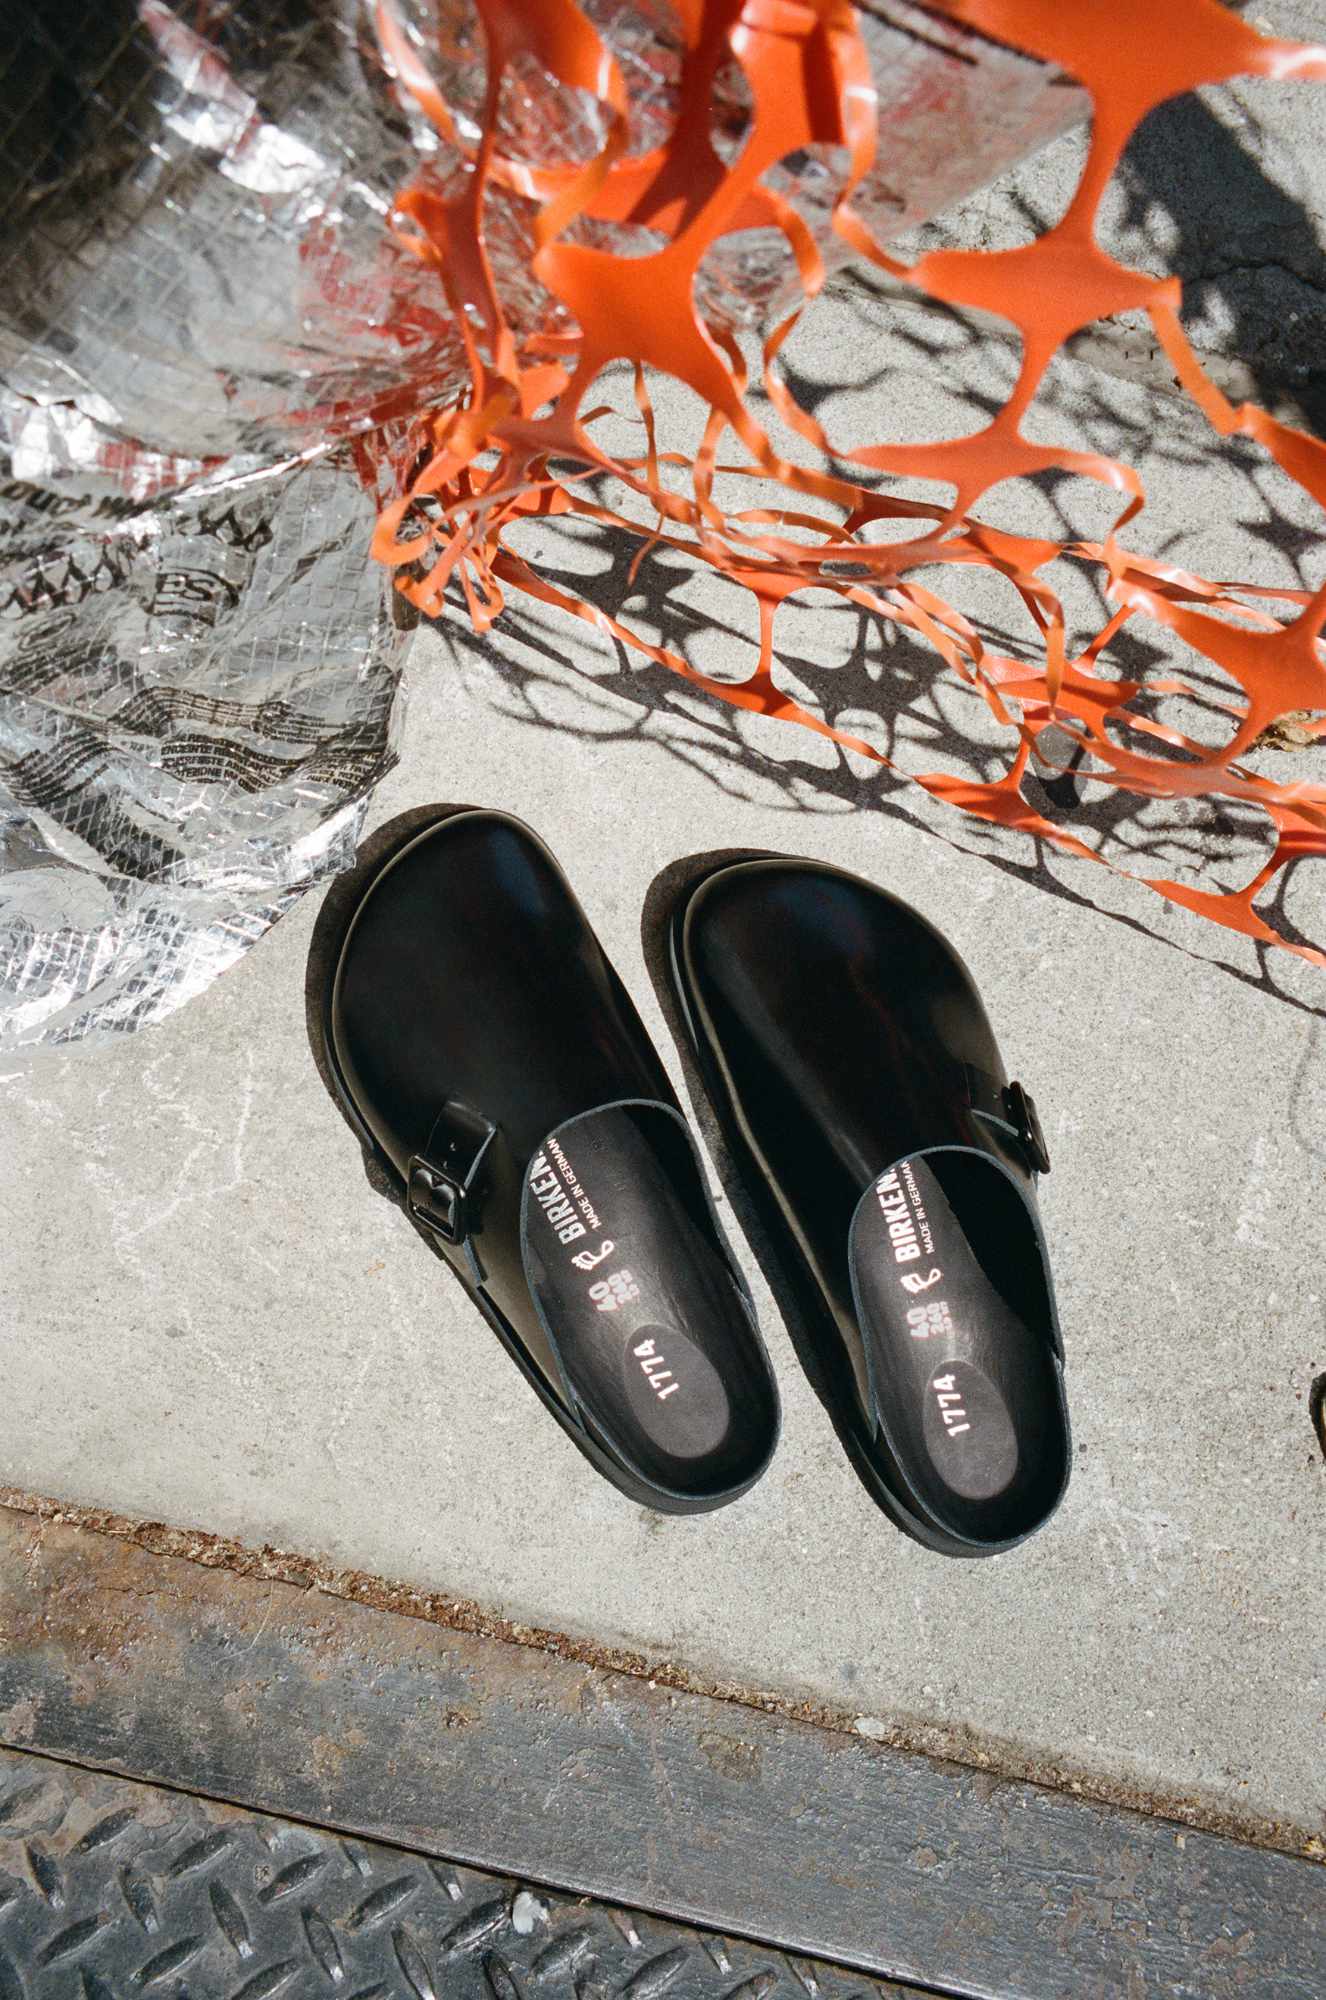 Birkenstock's SS24 1774 sandal collection campaign